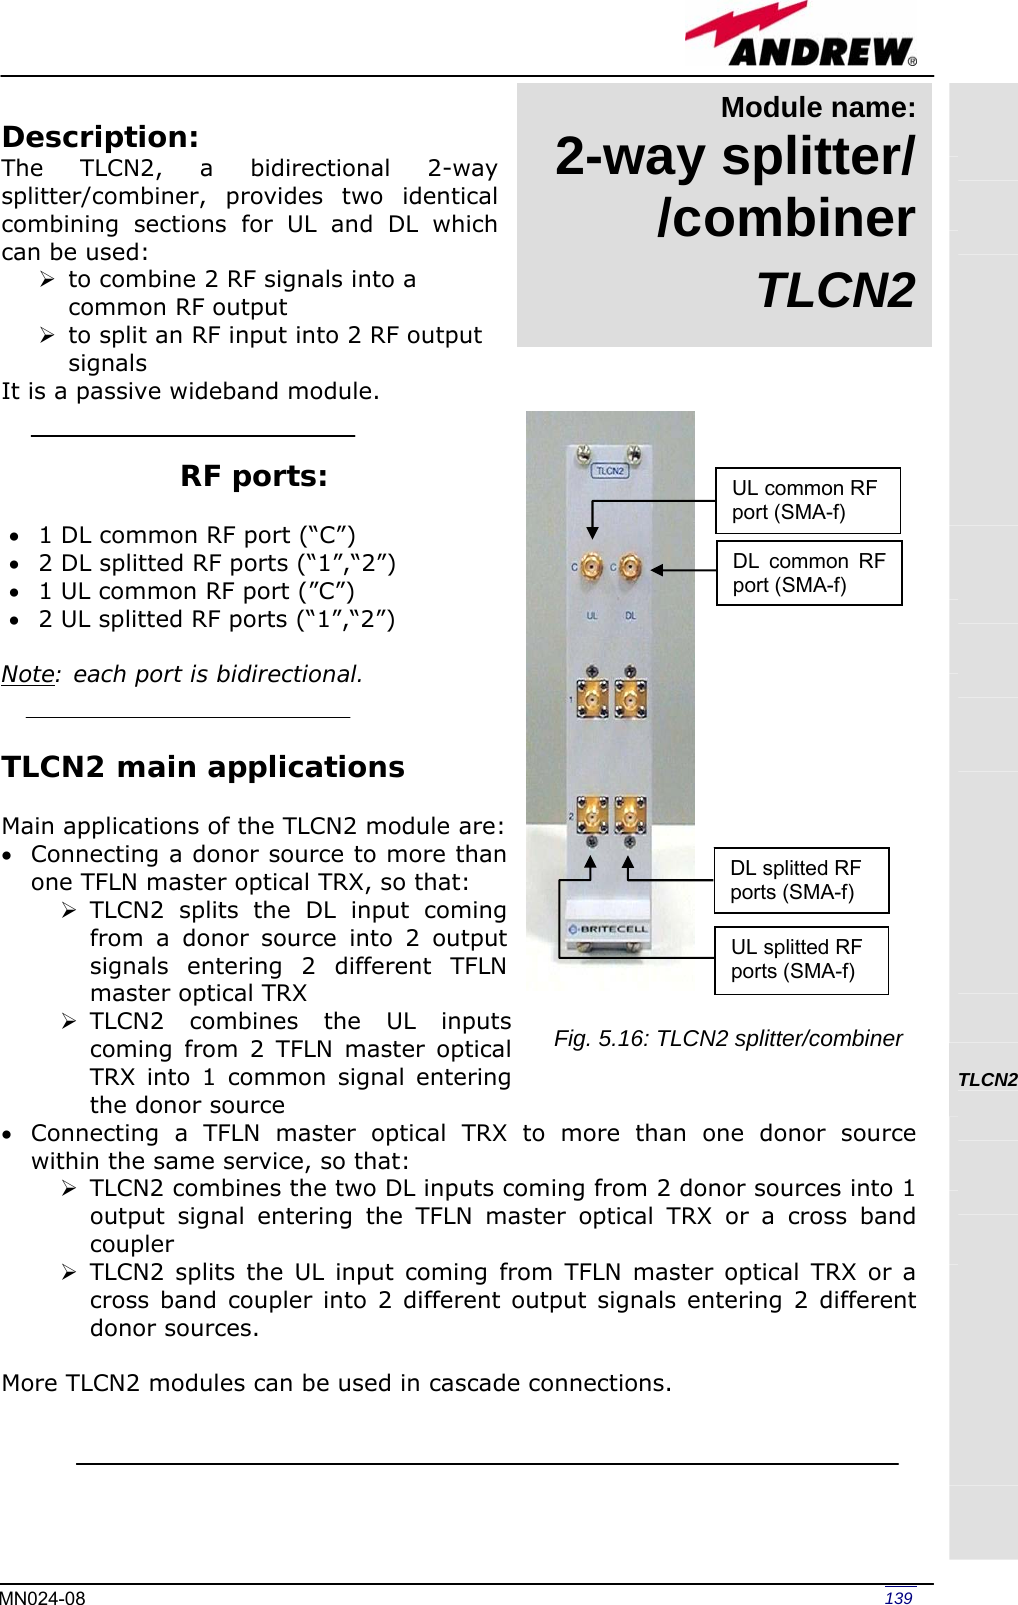   139MN024-08 Description: The TLCN2, a bidirectional 2-way splitter/combiner, provides two identical combining sections for UL and DL which can be used: ¾ to combine 2 RF signals into a common RF output ¾ to split an RF input into 2 RF output signals It is a passive wideband module.   RF ports:  • 1 DL common RF port (“C”)  • 2 DL splitted RF ports (“1”,“2”) • 1 UL common RF port (”C”) • 2 UL splitted RF ports (“1”,“2”)  Note: each port is bidirectional.   TLCN2 main applications  Main applications of the TLCN2 module are: • Connecting a donor source to more than one TFLN master optical TRX, so that: ¾ TLCN2 splits the DL input coming from a donor source into 2 output signals entering 2 different TFLN master optical TRX ¾ TLCN2 combines the UL inputs coming from 2 TFLN master optical TRX into 1 common signal entering the donor source • Connecting a TFLN master optical TRX to more than one donor source within the same service, so that: ¾ TLCN2 combines the two DL inputs coming from 2 donor sources into 1 output signal entering the TFLN master optical TRX or a cross band coupler ¾ TLCN2 splits the UL input coming from TFLN master optical TRX or a cross band coupler into 2 different output signals entering 2 different donor sources.  More TLCN2 modules can be used in cascade connections.                    TLCN2      DL common RF port (SMA-f) UL common RF port (SMA-f) UL splitted RF ports (SMA-f) DL splitted RF ports (SMA-f) Fig. 5.16: TLCN2 splitter/combiner Module name: 2-way splitter/ /combinerTLCN2